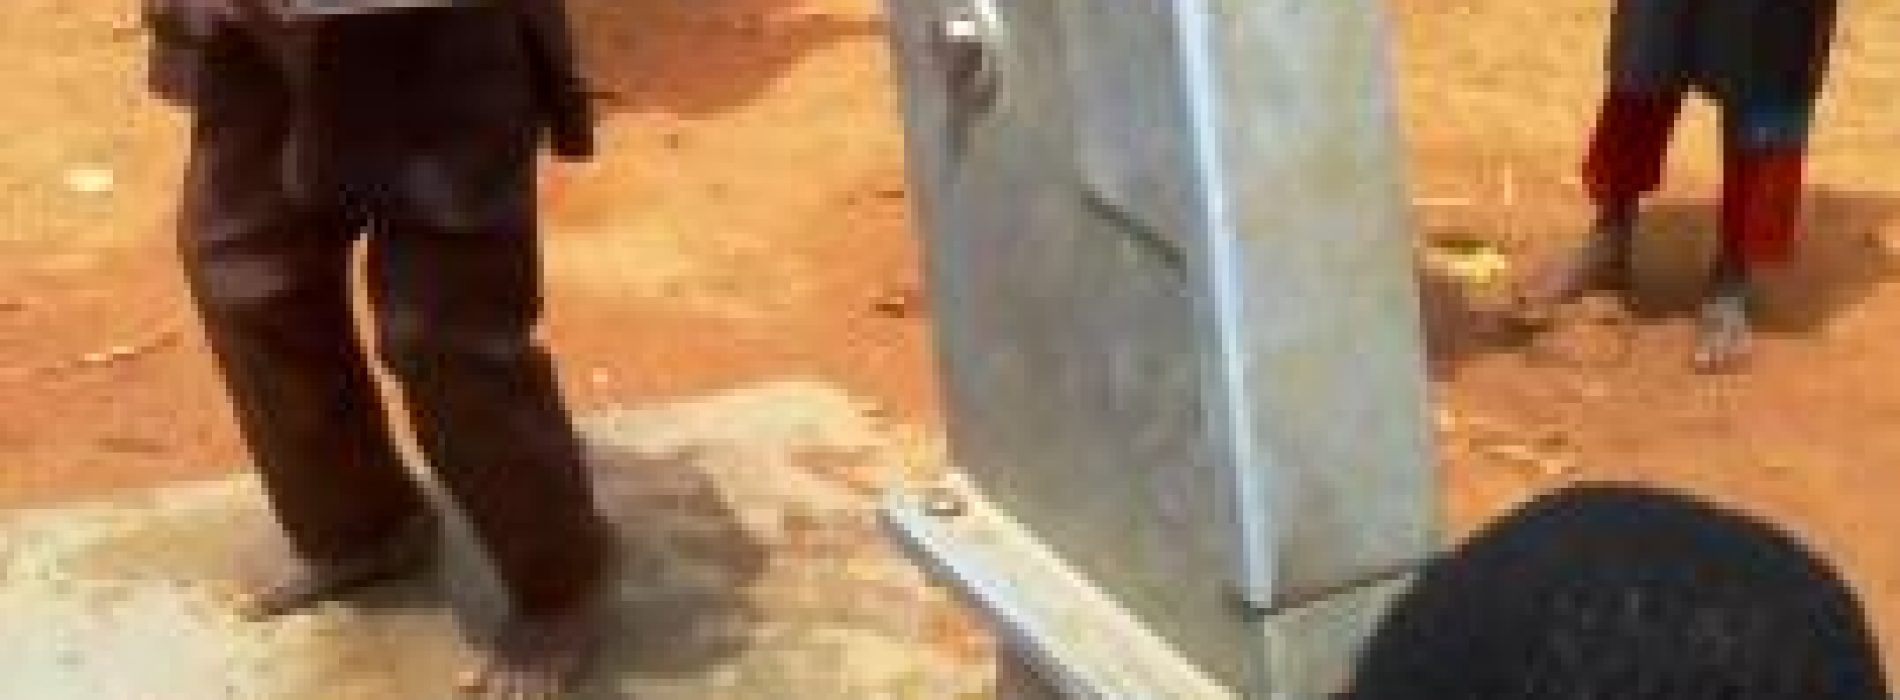 Open defecation: Borehole makes a difference in Kano community